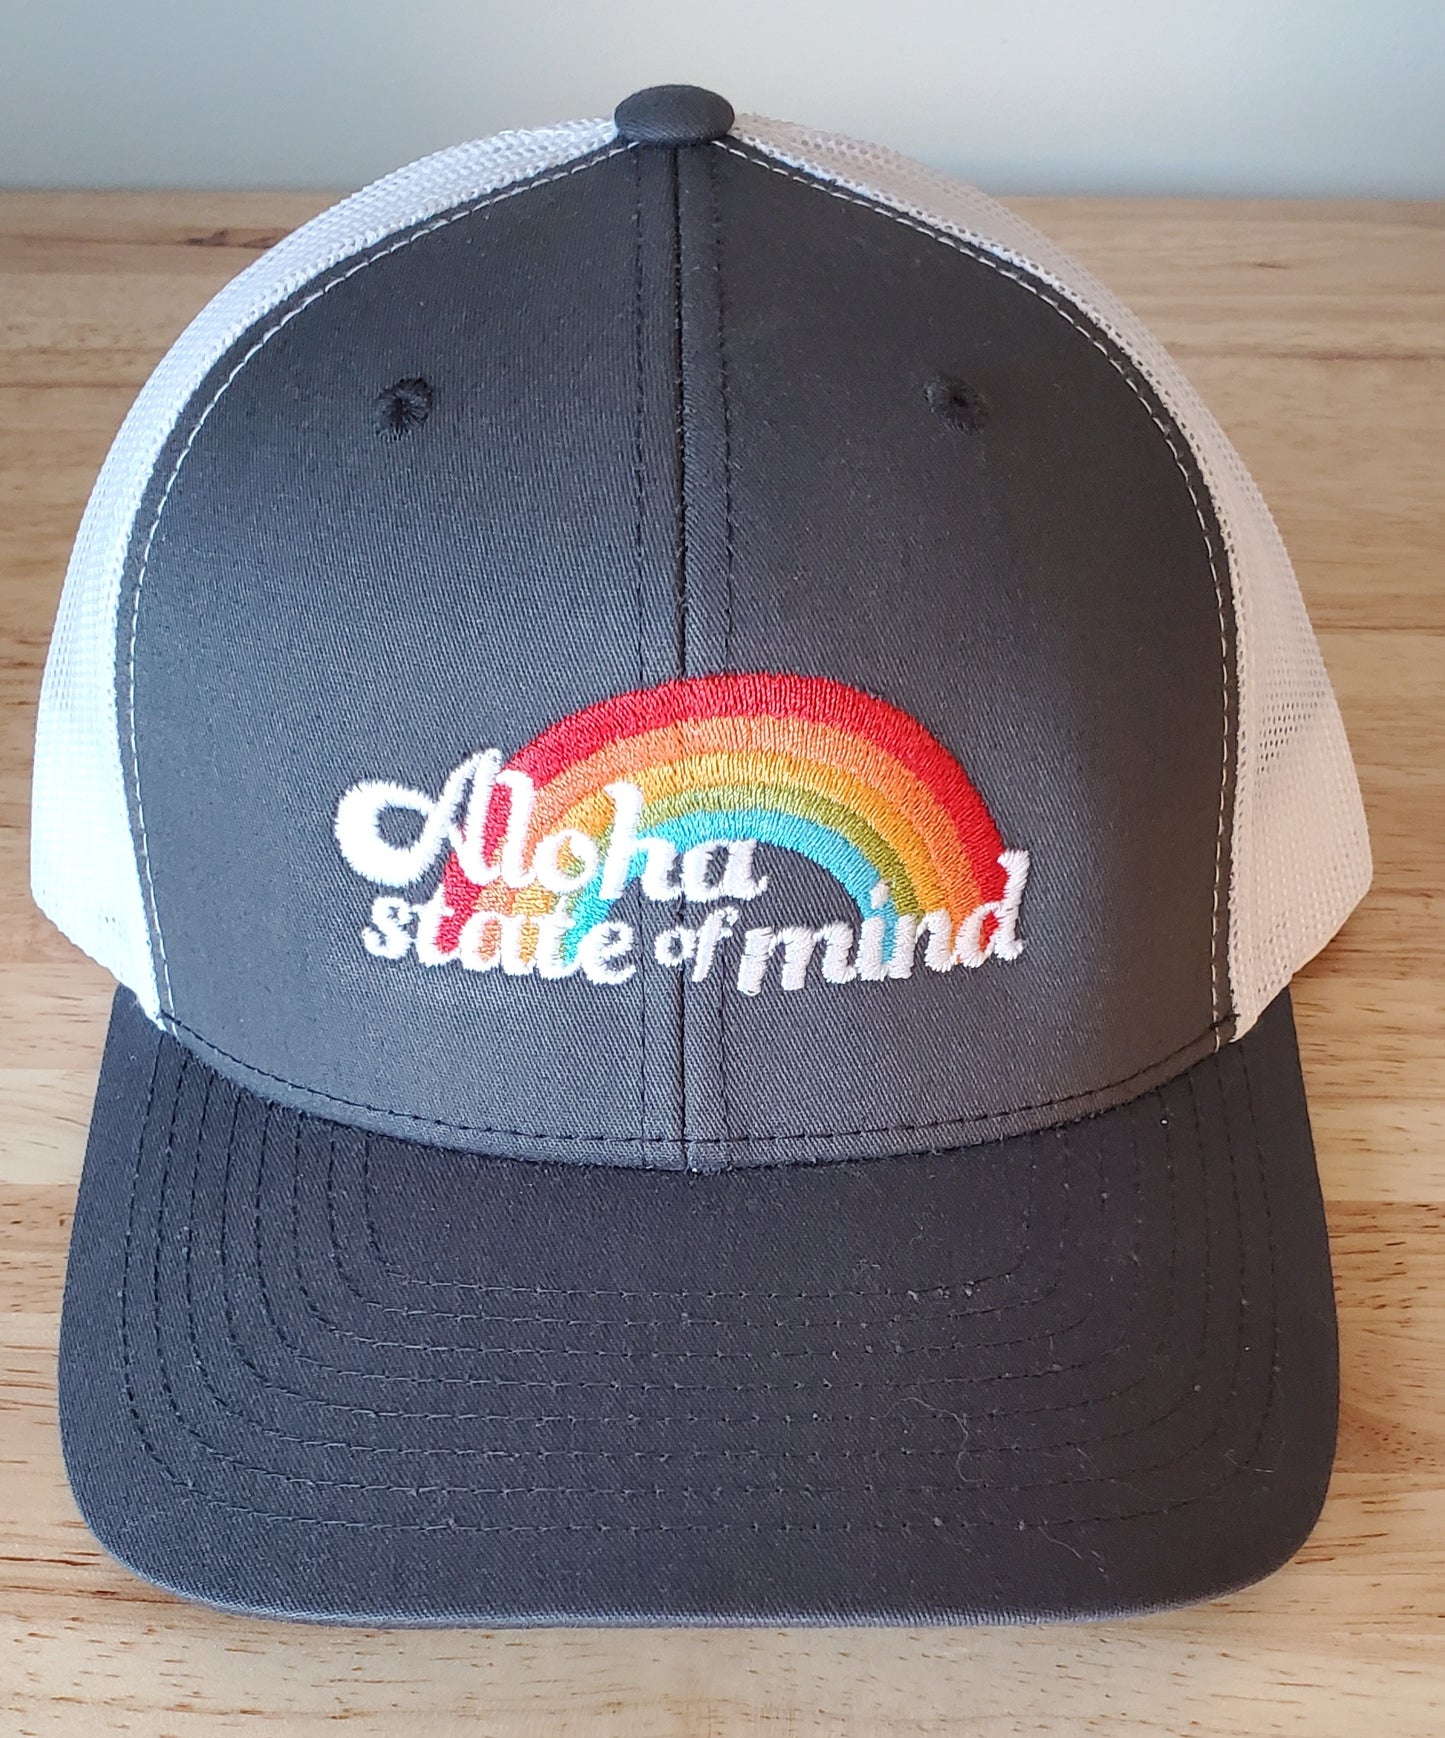 Aloha State of Mind Retro Trucker Hat in Charcoal Gray